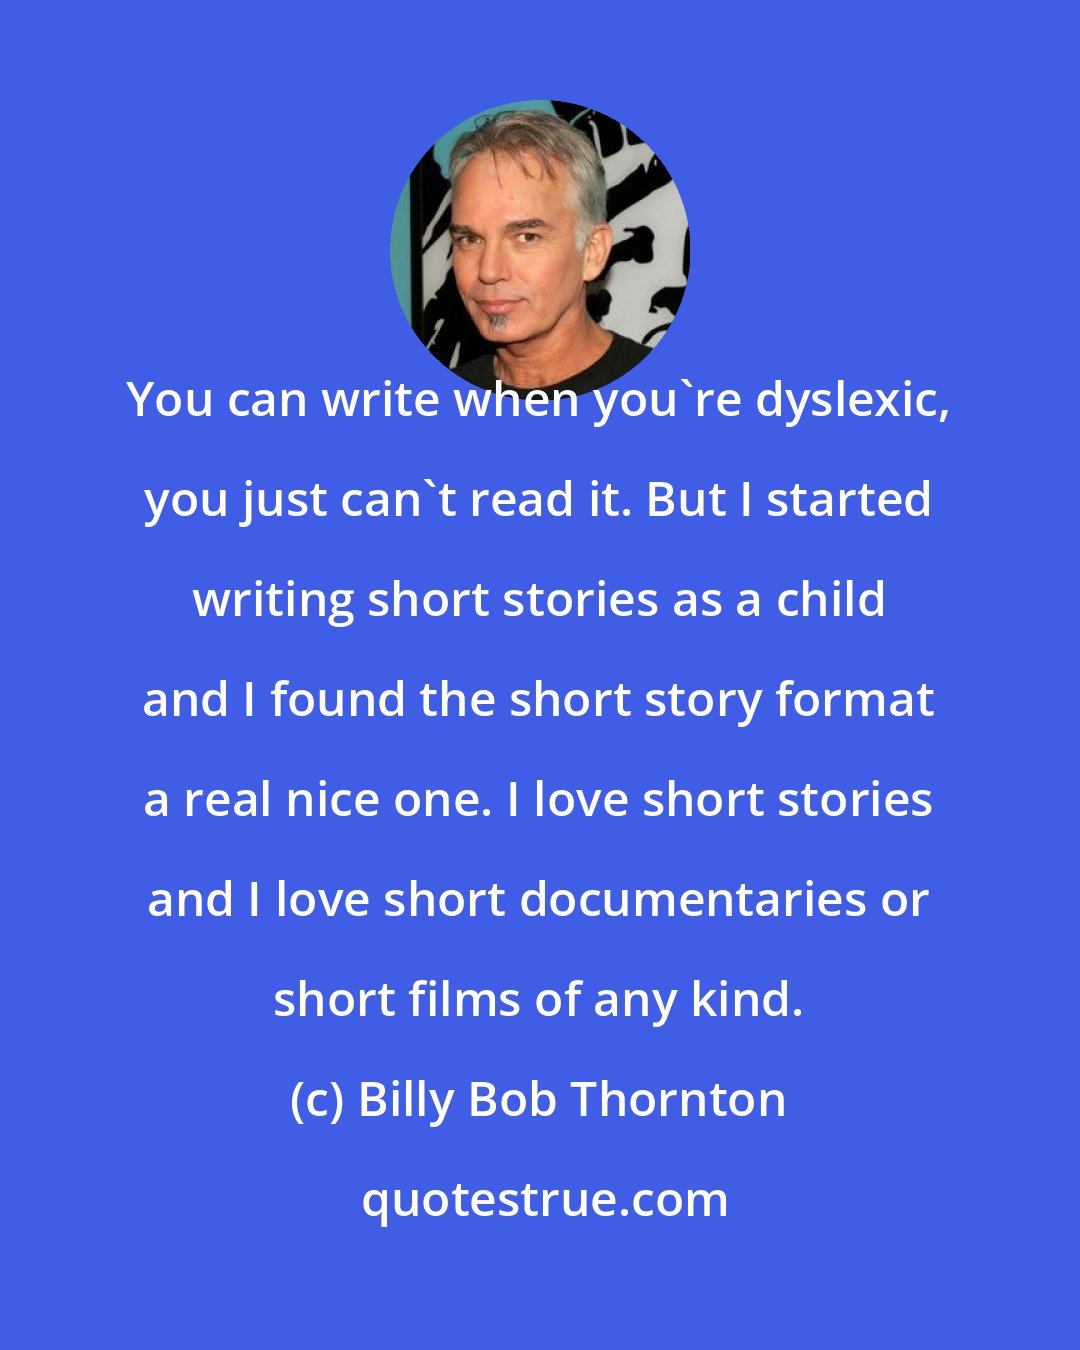 Billy Bob Thornton: You can write when you're dyslexic, you just can't read it. But I started writing short stories as a child and I found the short story format a real nice one. I love short stories and I love short documentaries or short films of any kind.